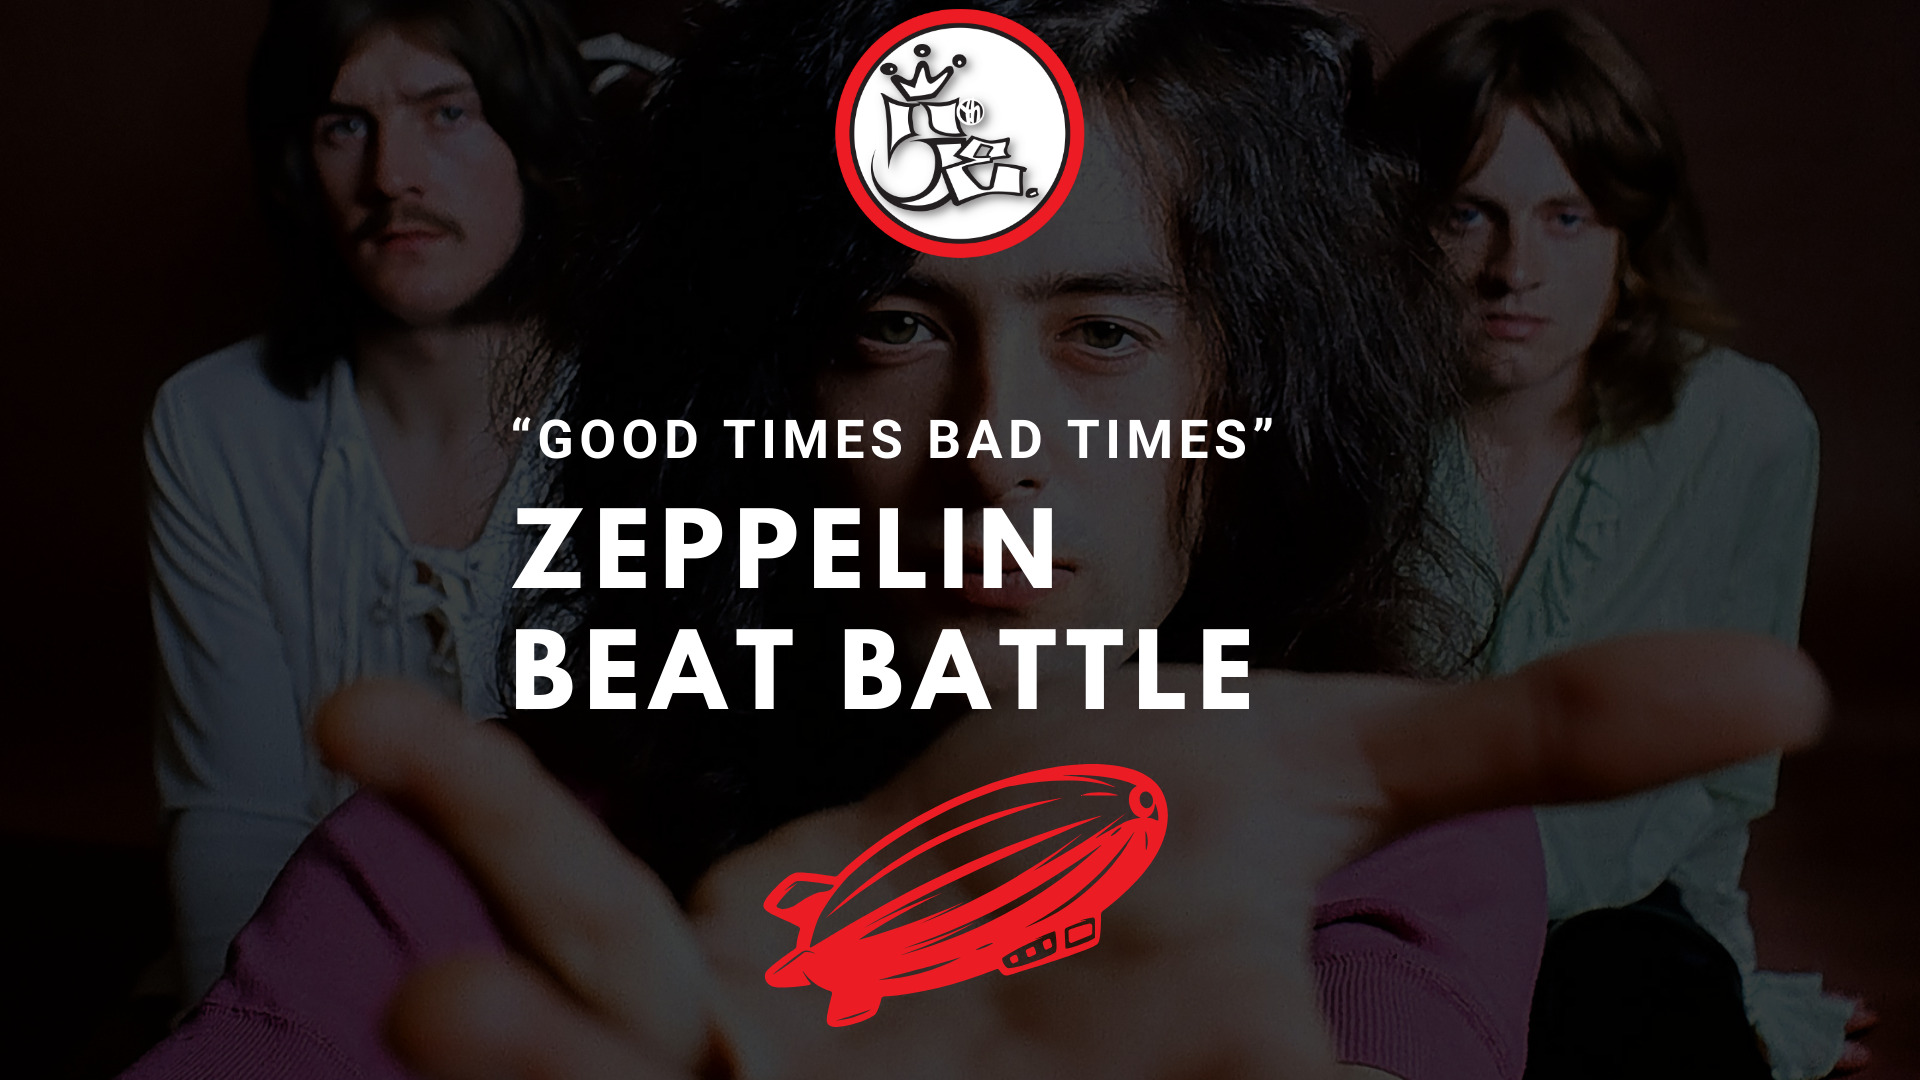 5th Empire Beat Battle featuring "Good Times Bad Times" by Led Zeppelin.